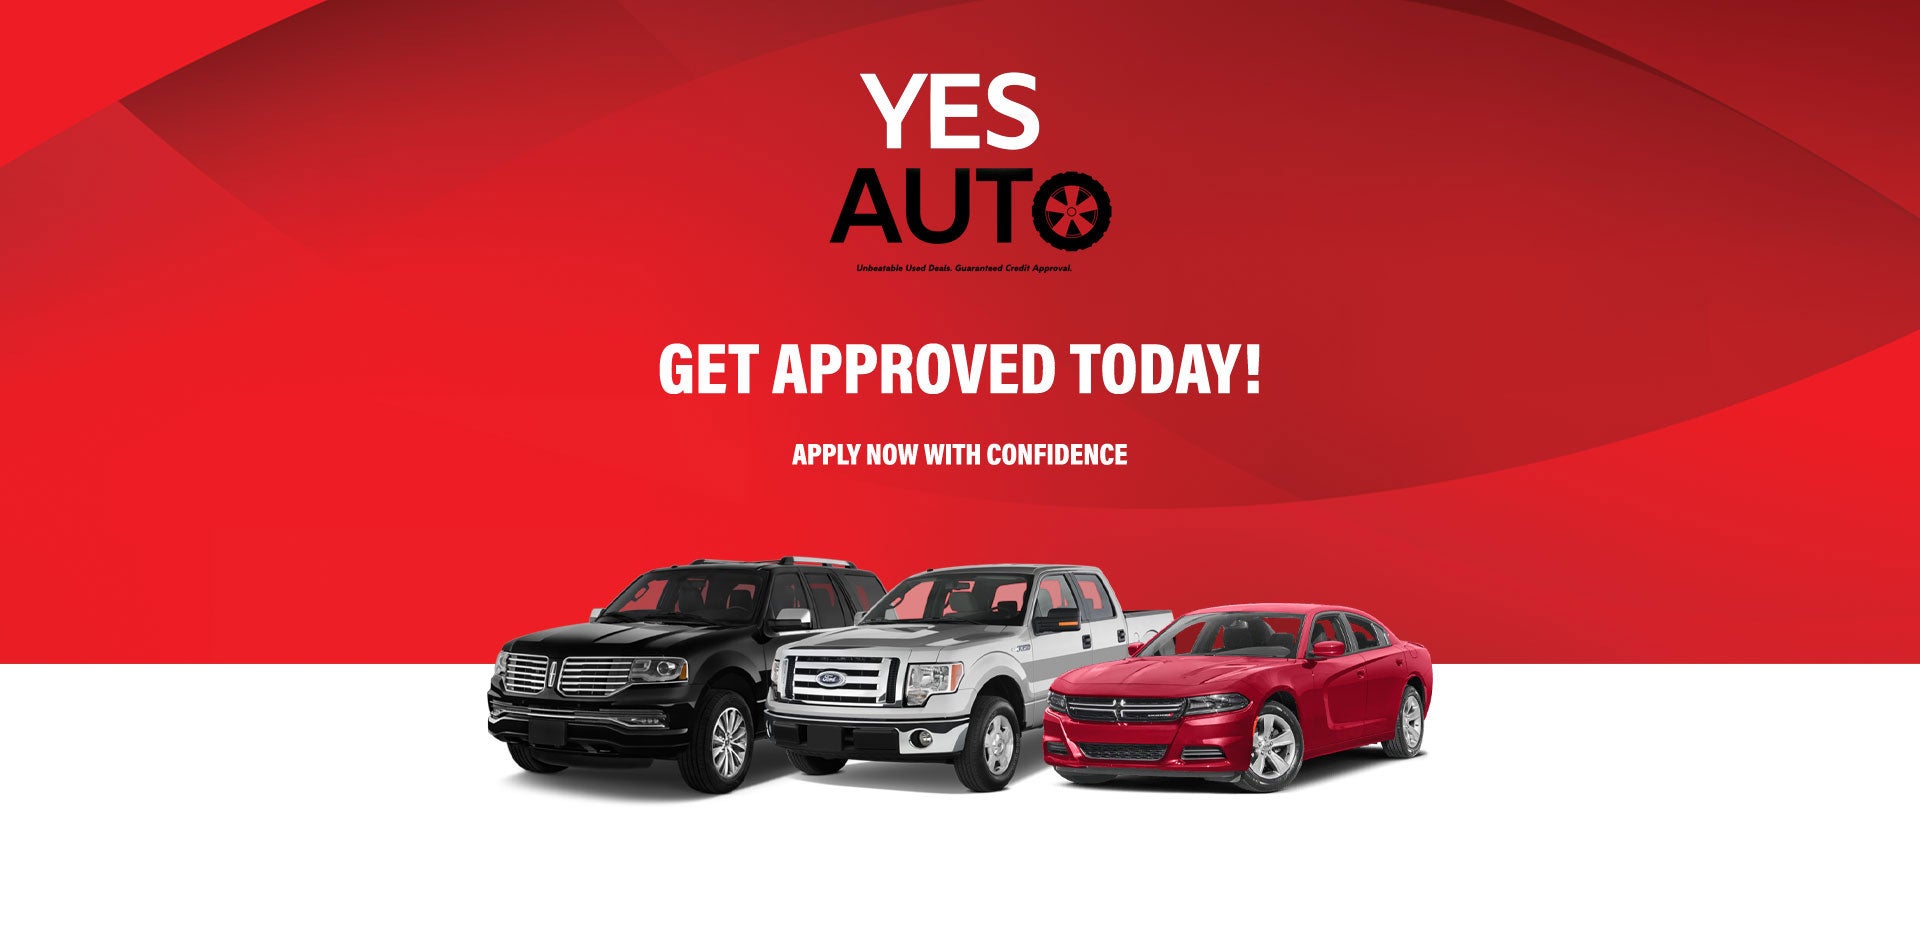 Yes Auto: Unbeatable used cars, guaranteed credit approval. Get Approved Today! Apply now with confidence